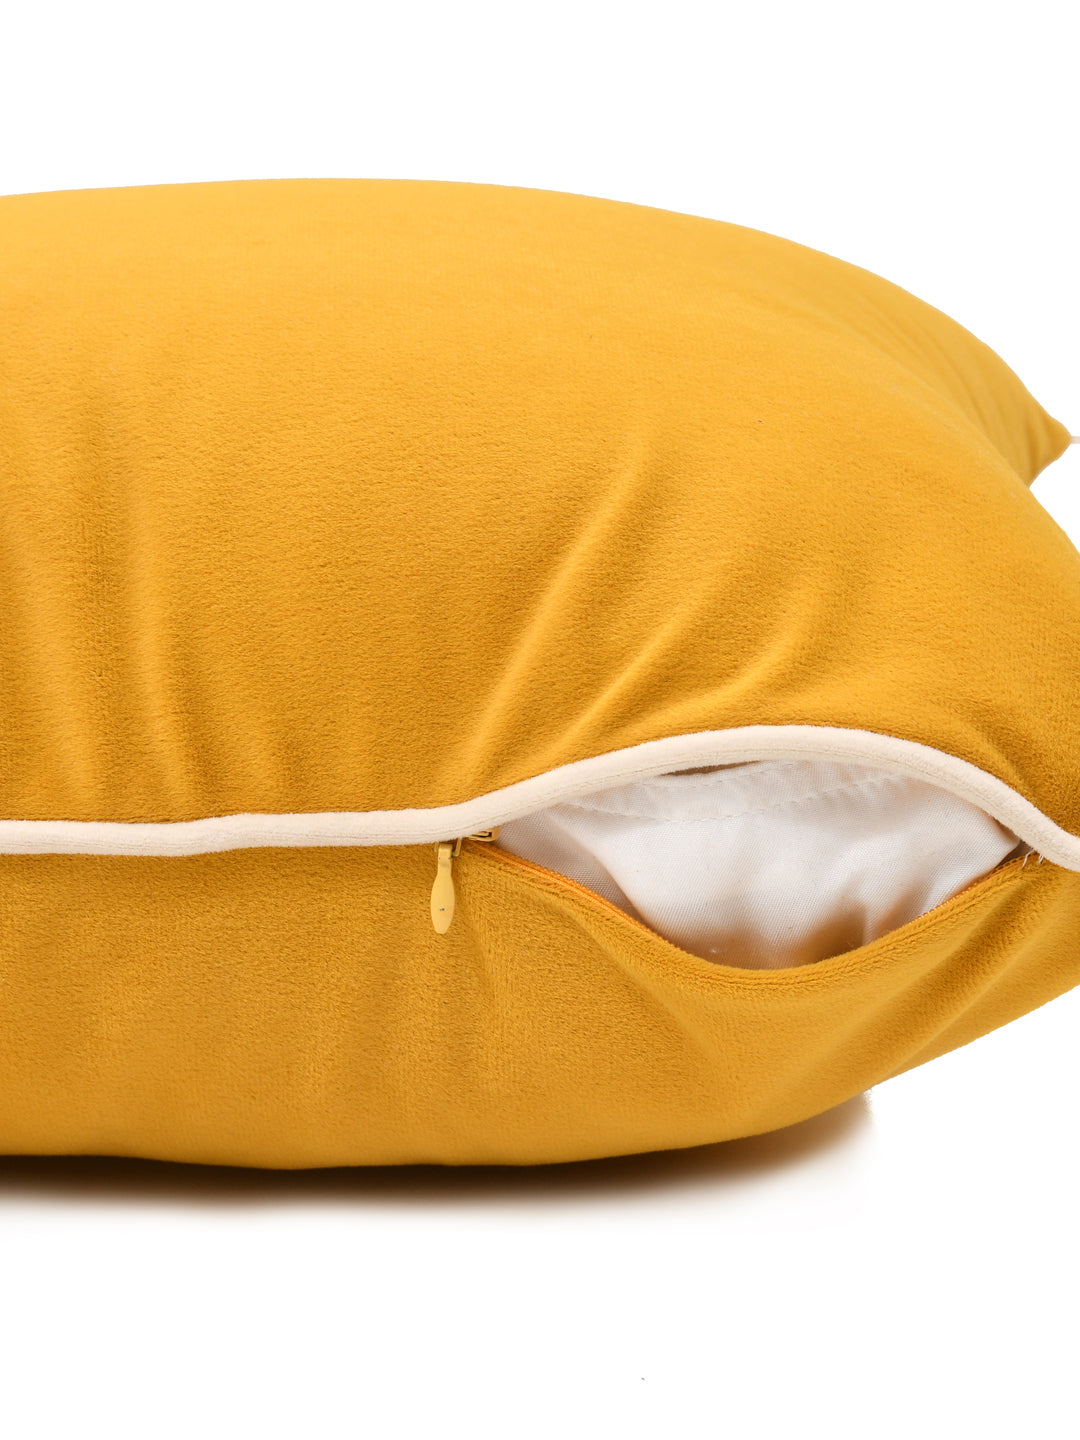 Velvet Cushion Covers; Set of 2; Amber Yellow With White Piping